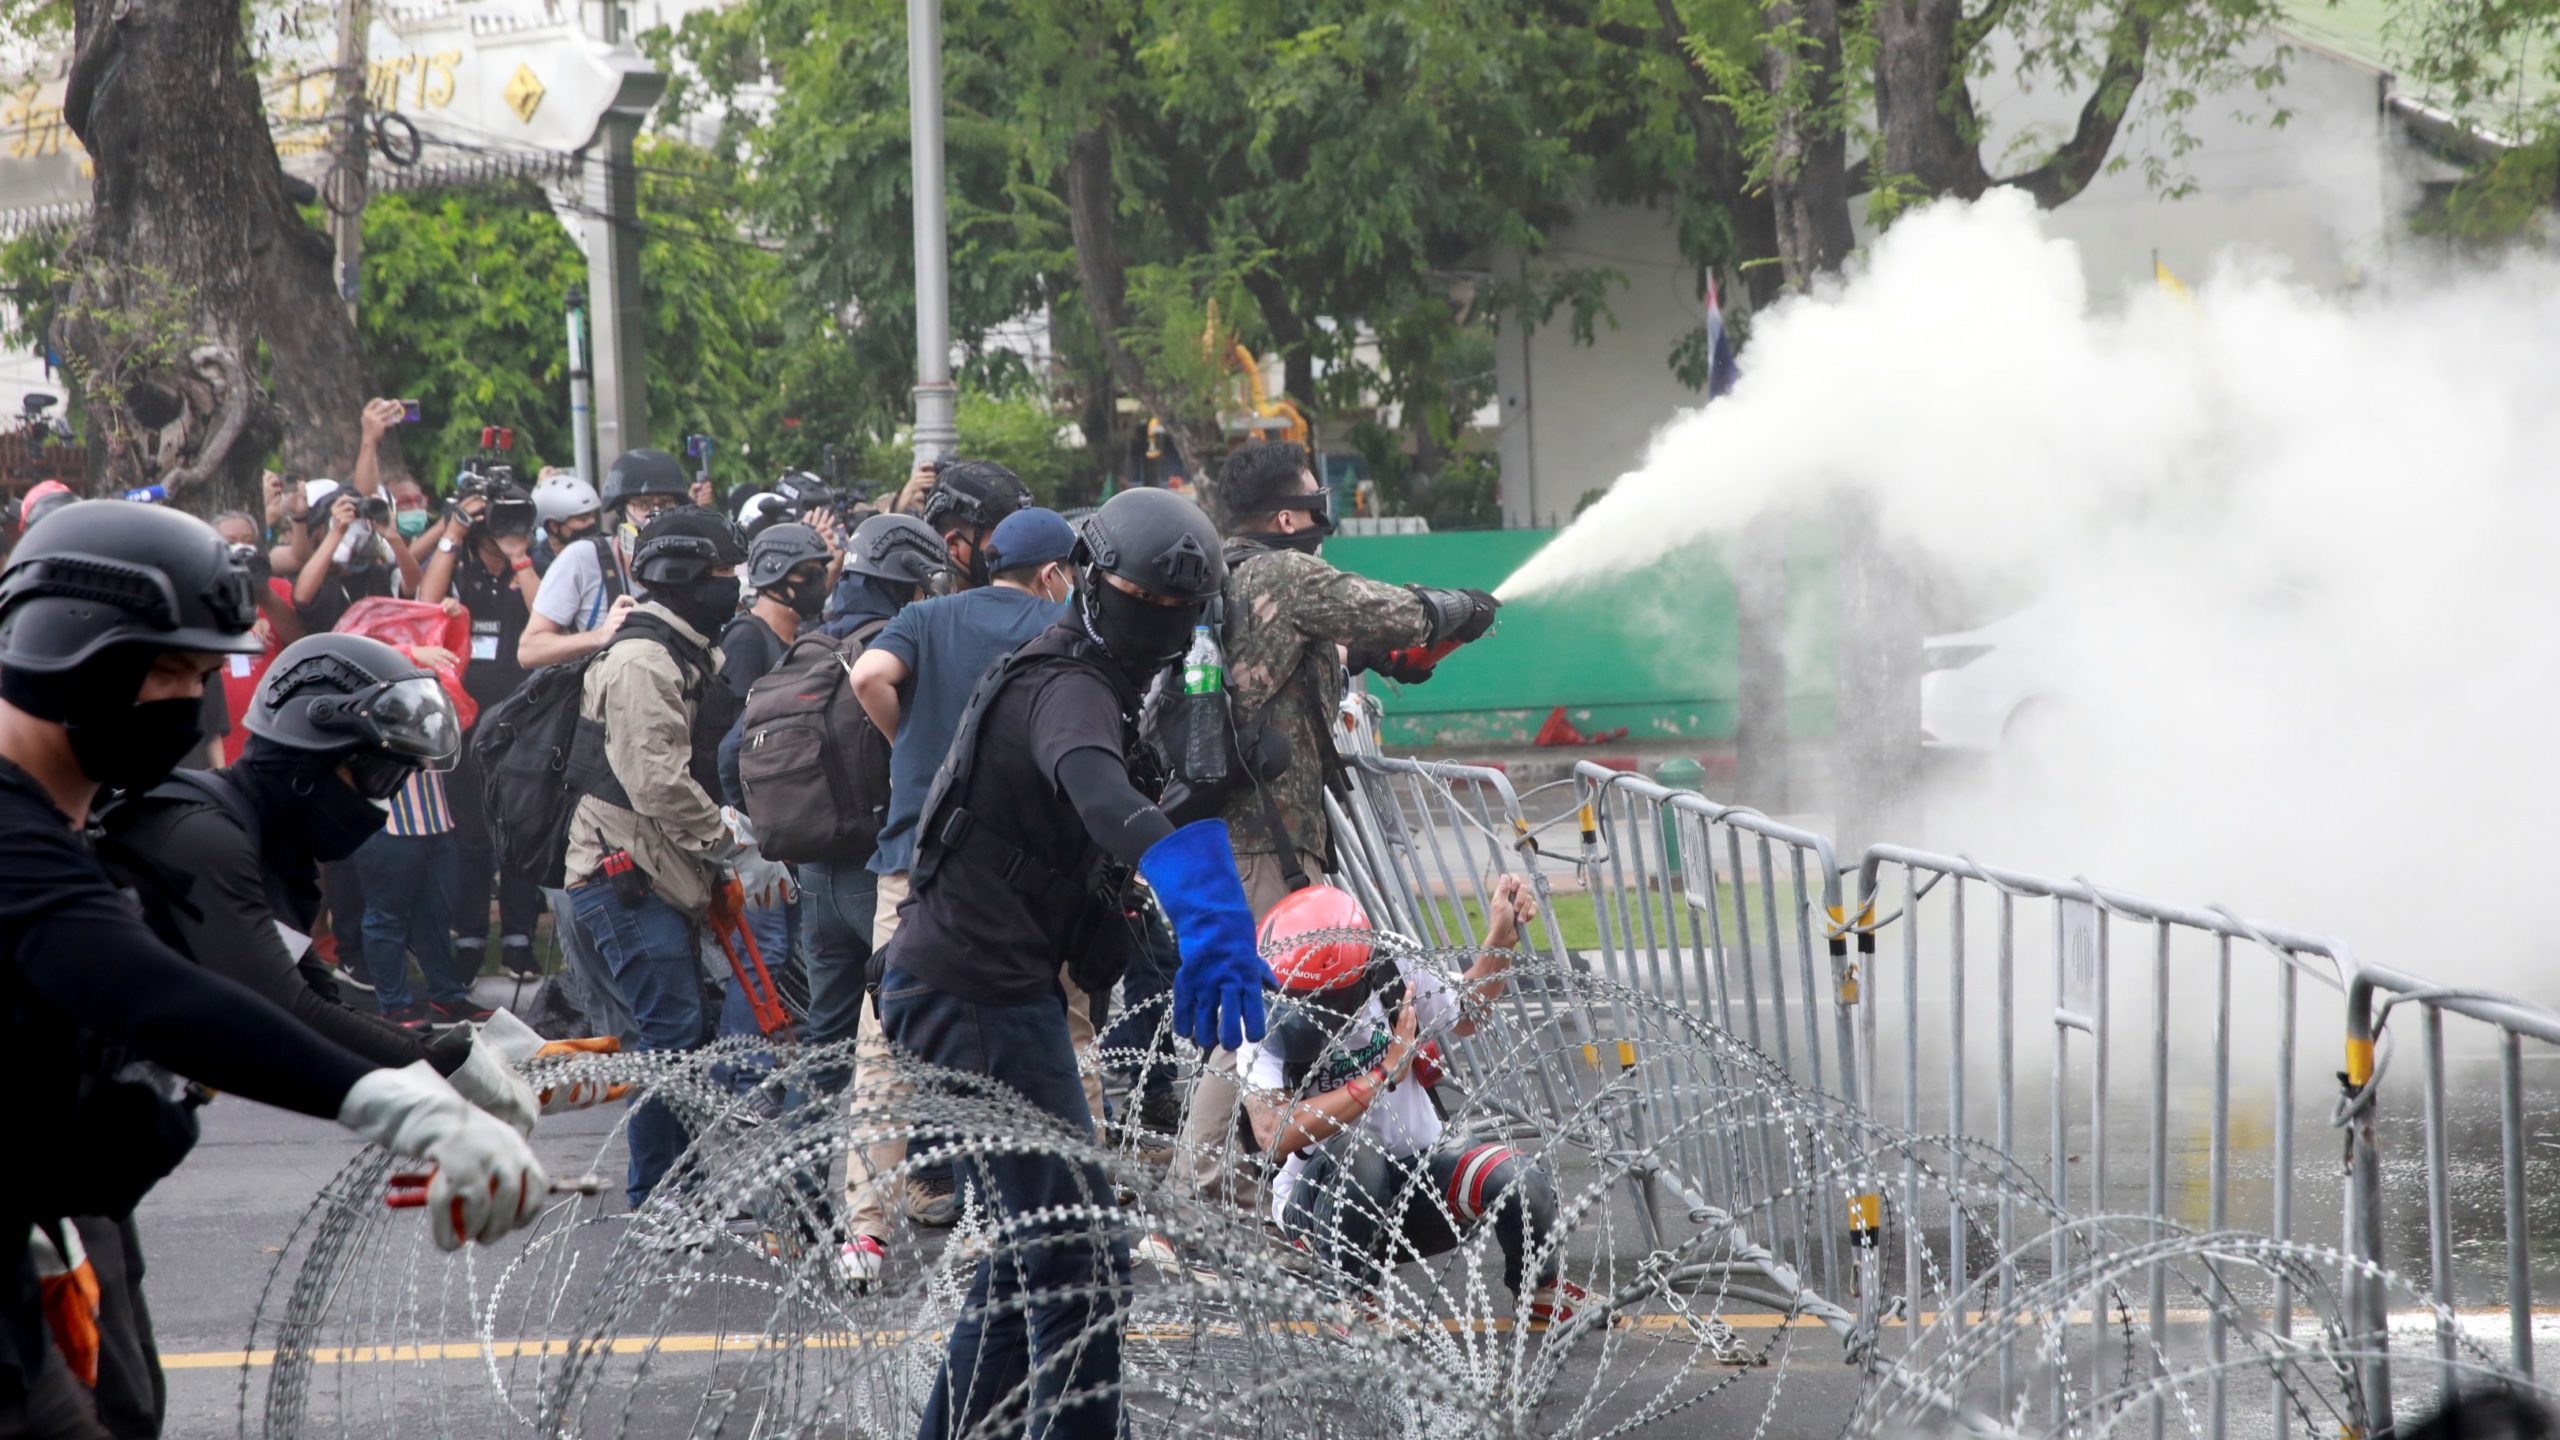 Protesters, Police Clash In Thailand Over PM’s Resignation